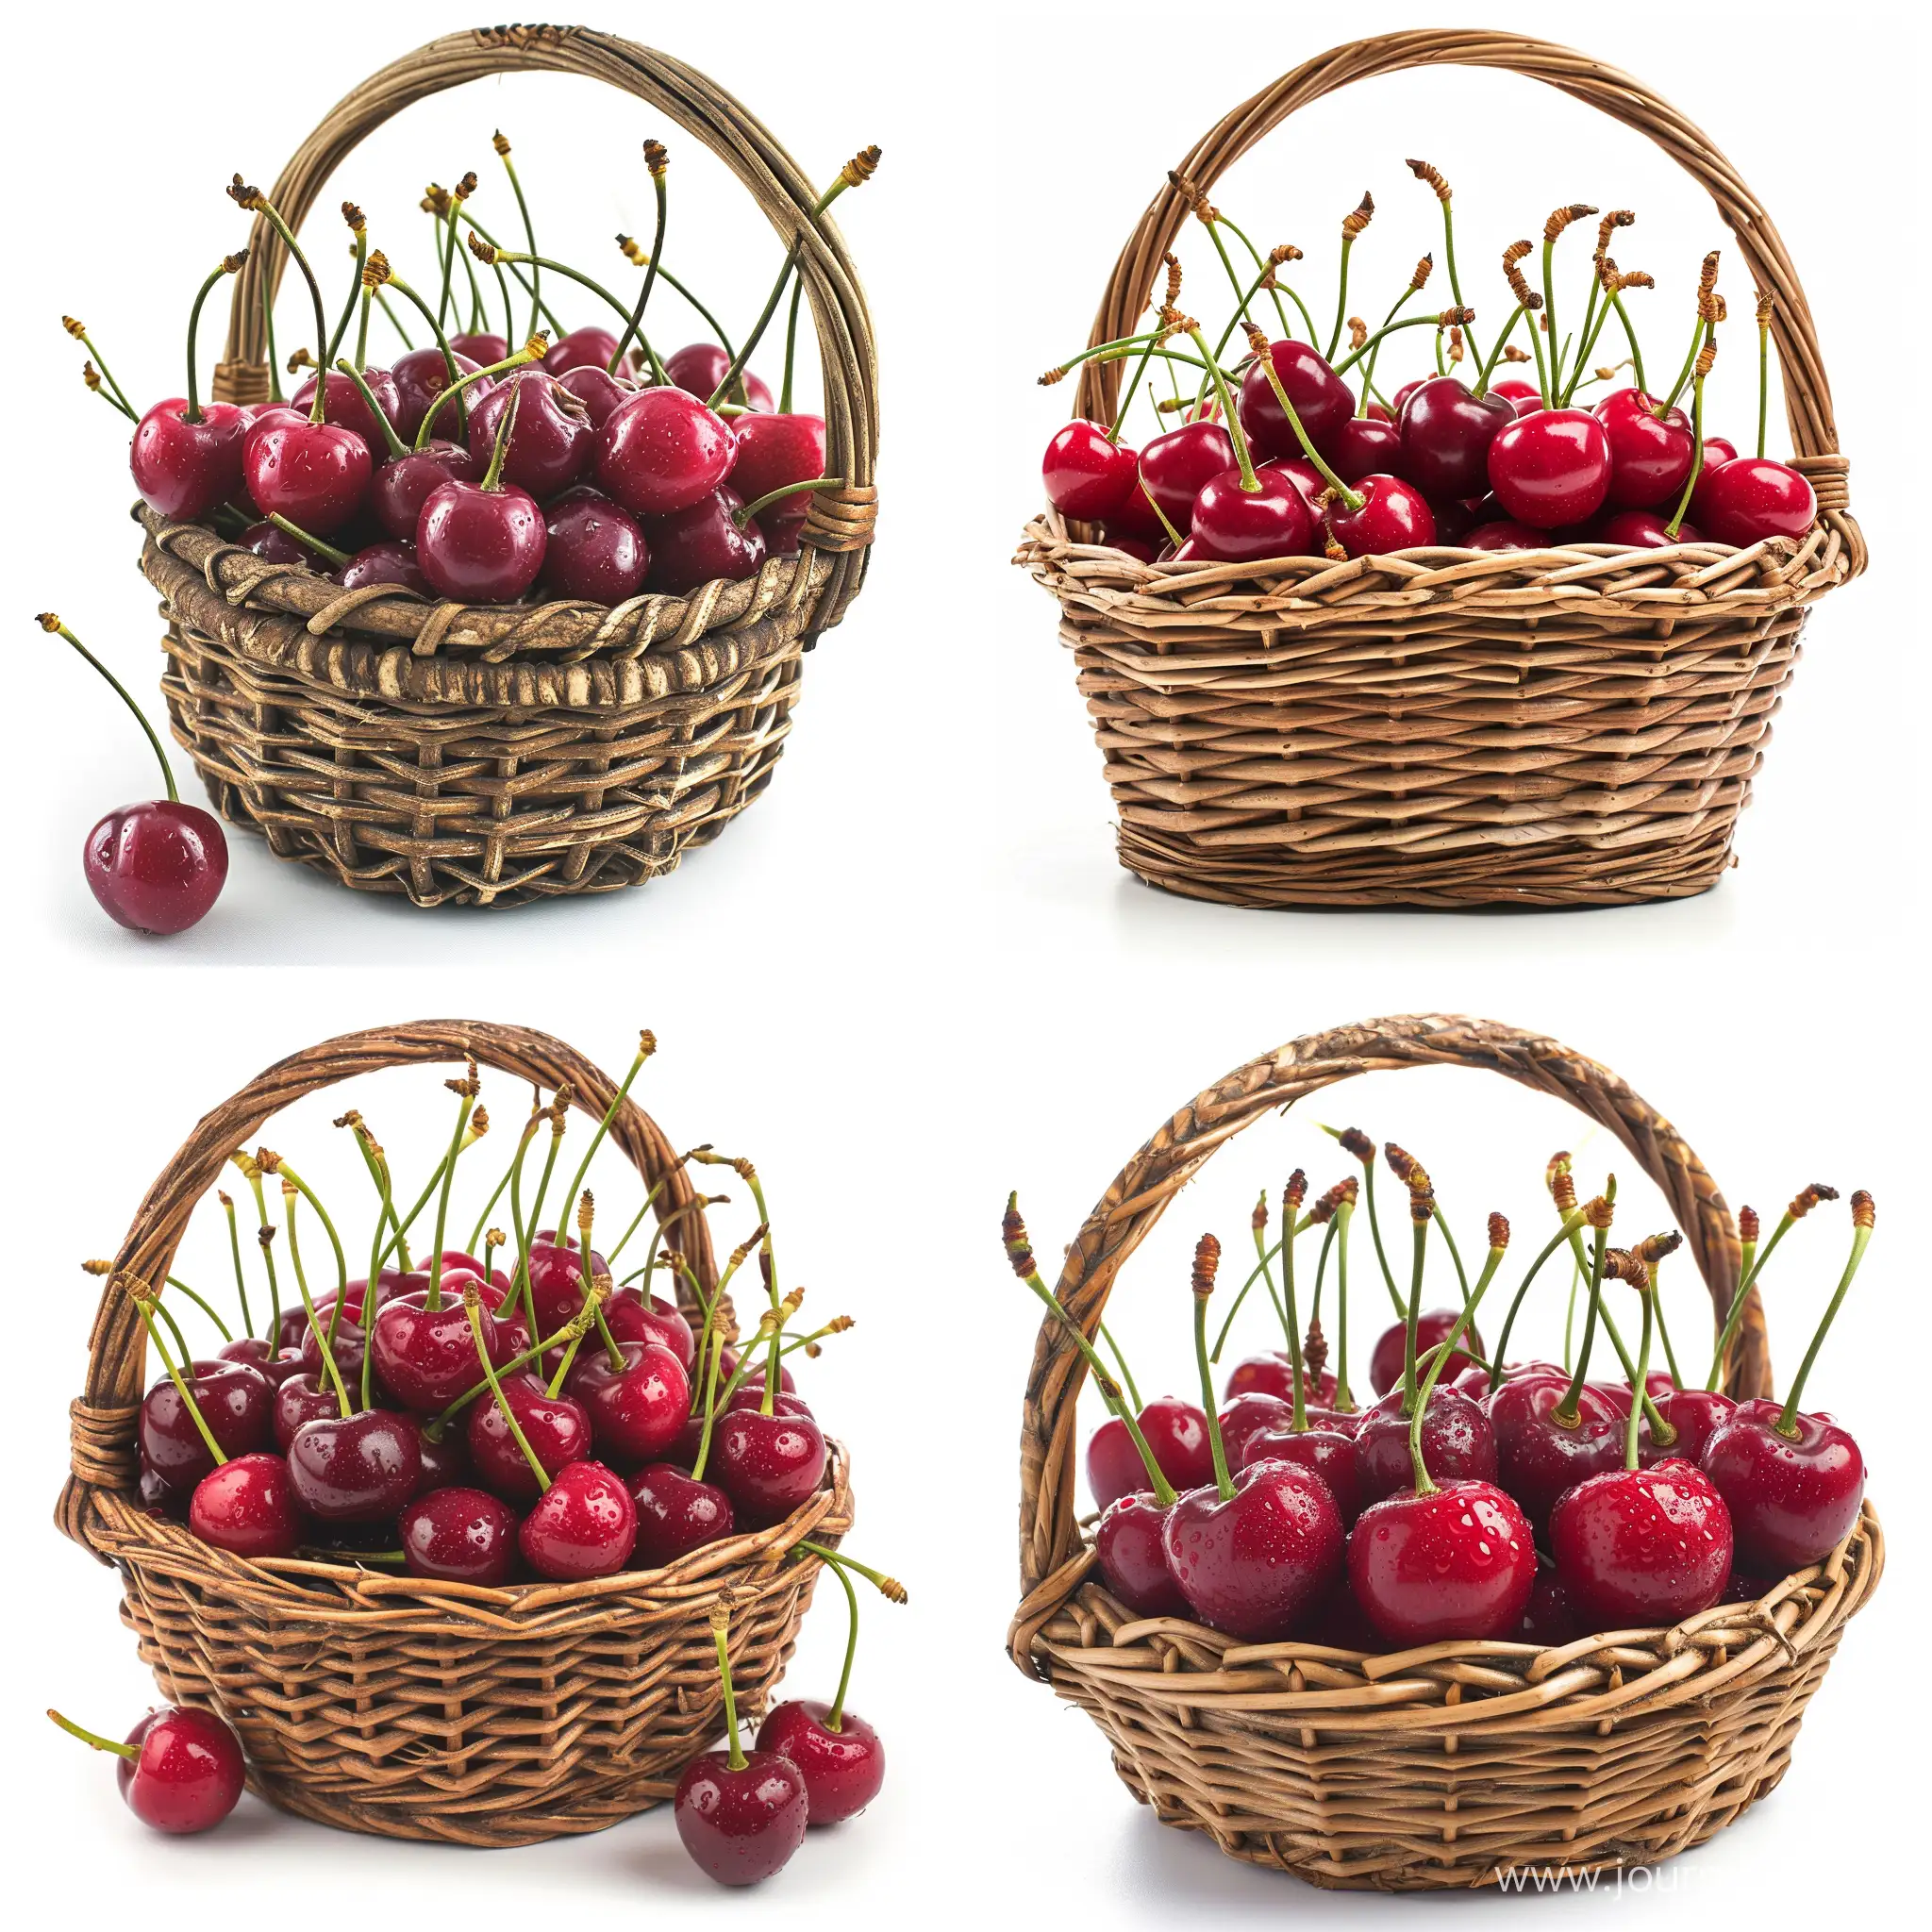 Isolated-Basket-of-Cherries-Vibrant-Single-Object-Photography